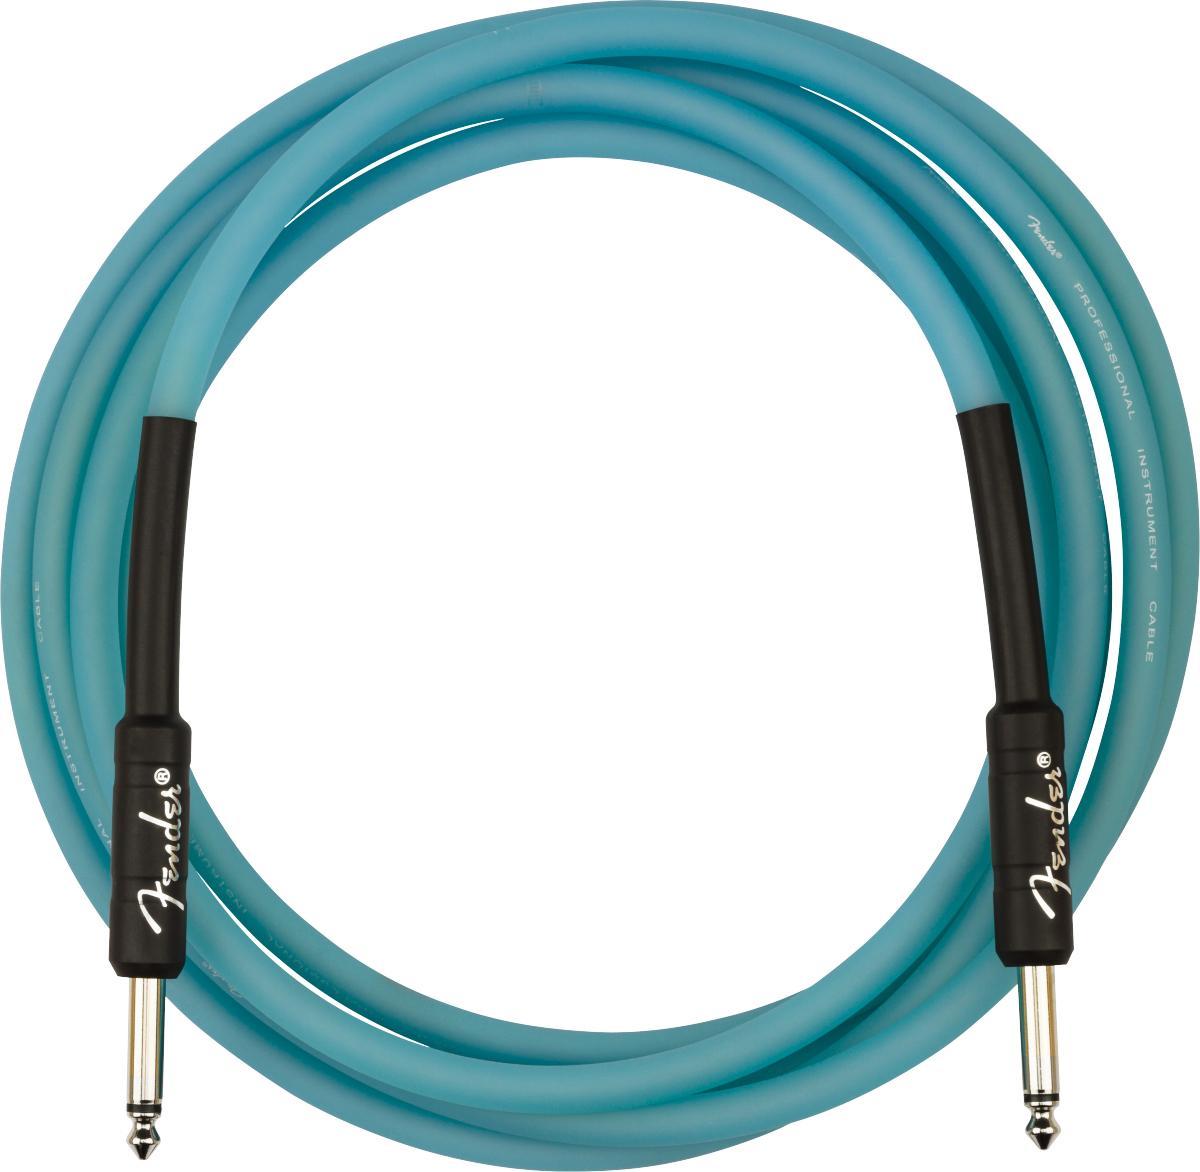 Kabel Fender Pro Glow In The Dark Instrument Cable, 10ft, Straight/Straight - Blue